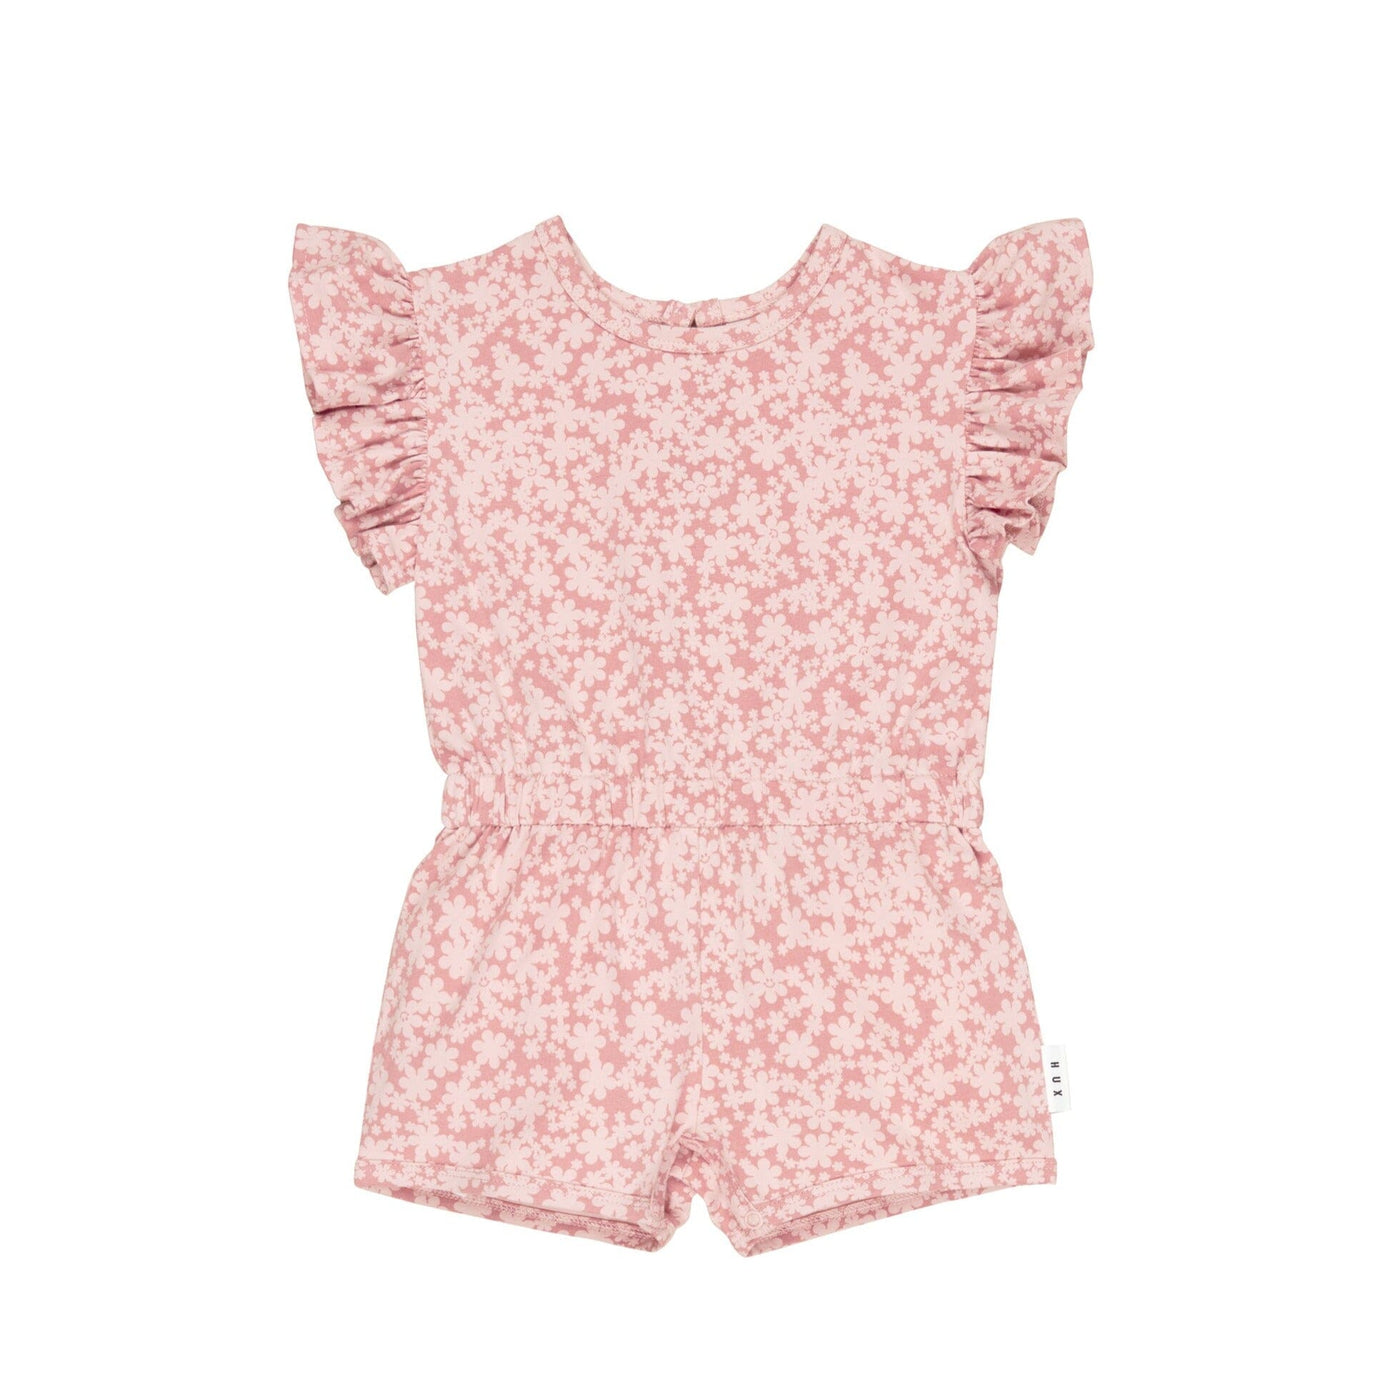 Huxbaby Smile Floral Frill Playsuit HB018S23 Playsuit Huxbaby 